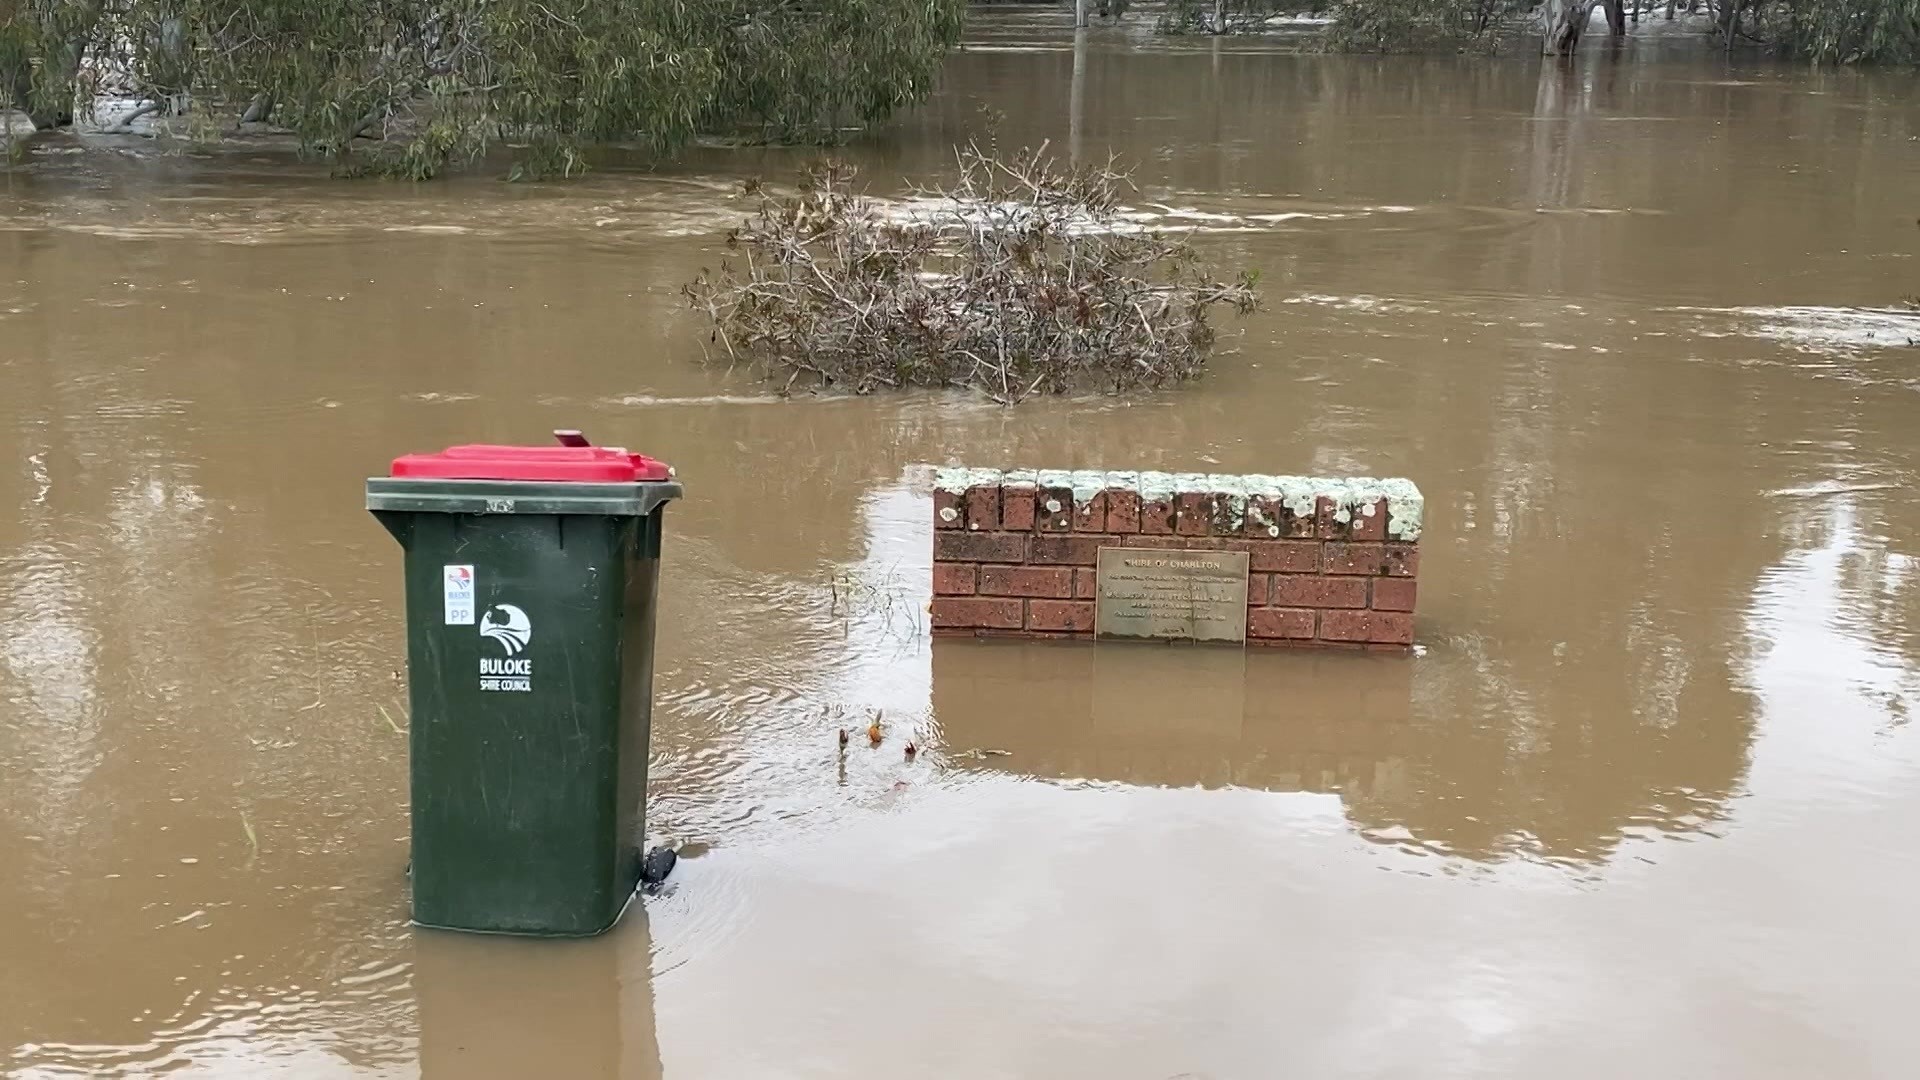 A bin and sign submerged in floodwaters.